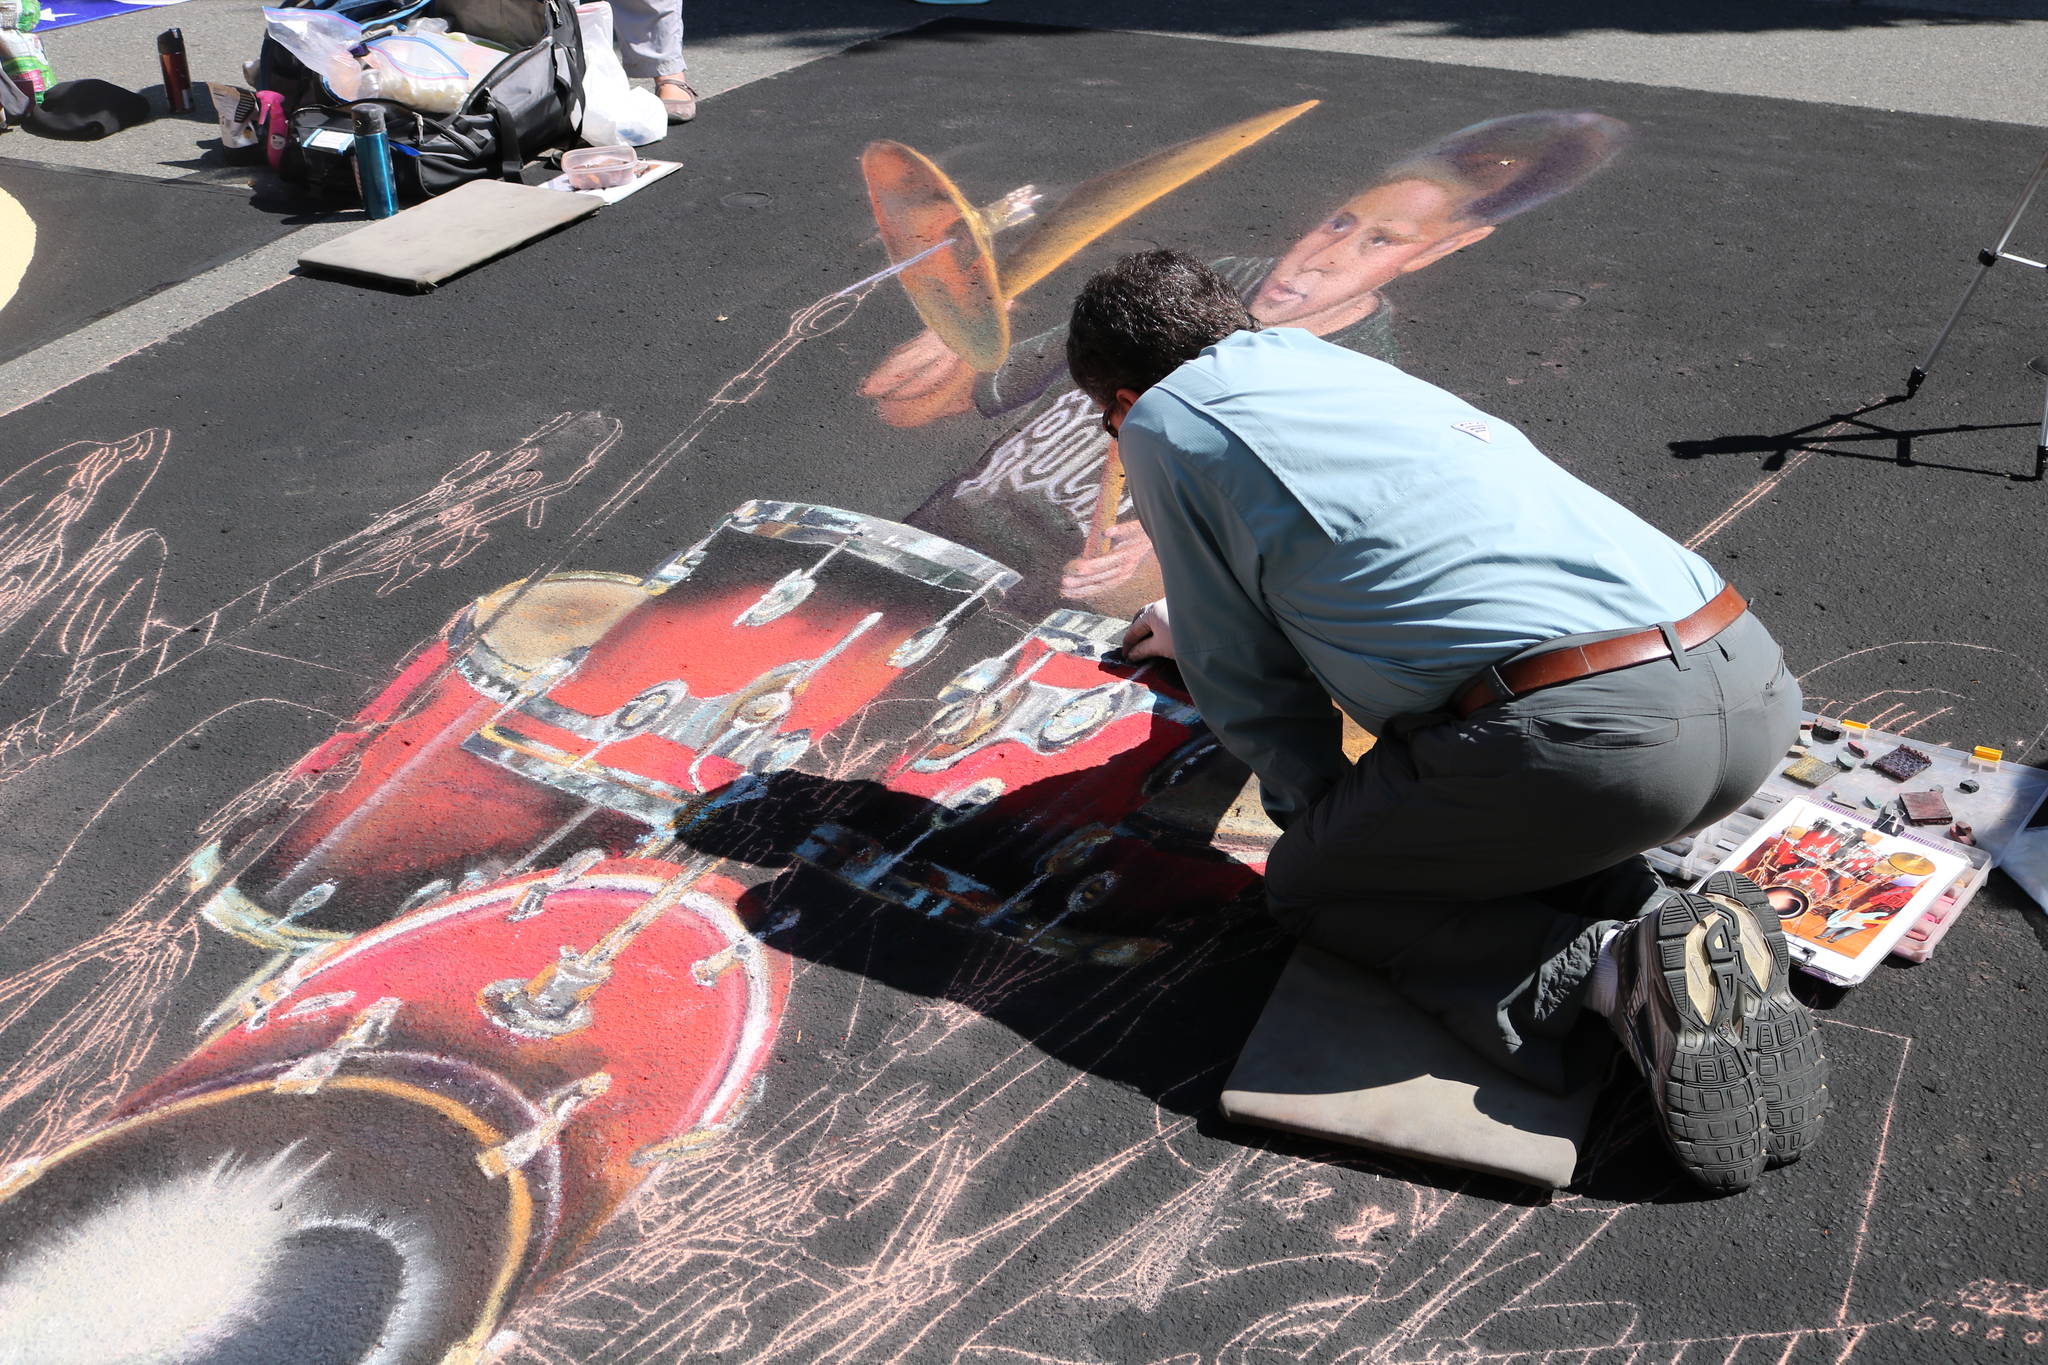 Wayne and Cheryl Renshaw shared credit for their chalk art creation that was on display at the Pacific NW Chalk Fest last weekend. Wayne Renshaw can be seen here drawing their picture last Saturday. Aaron Kunkler/Redmond Reporter